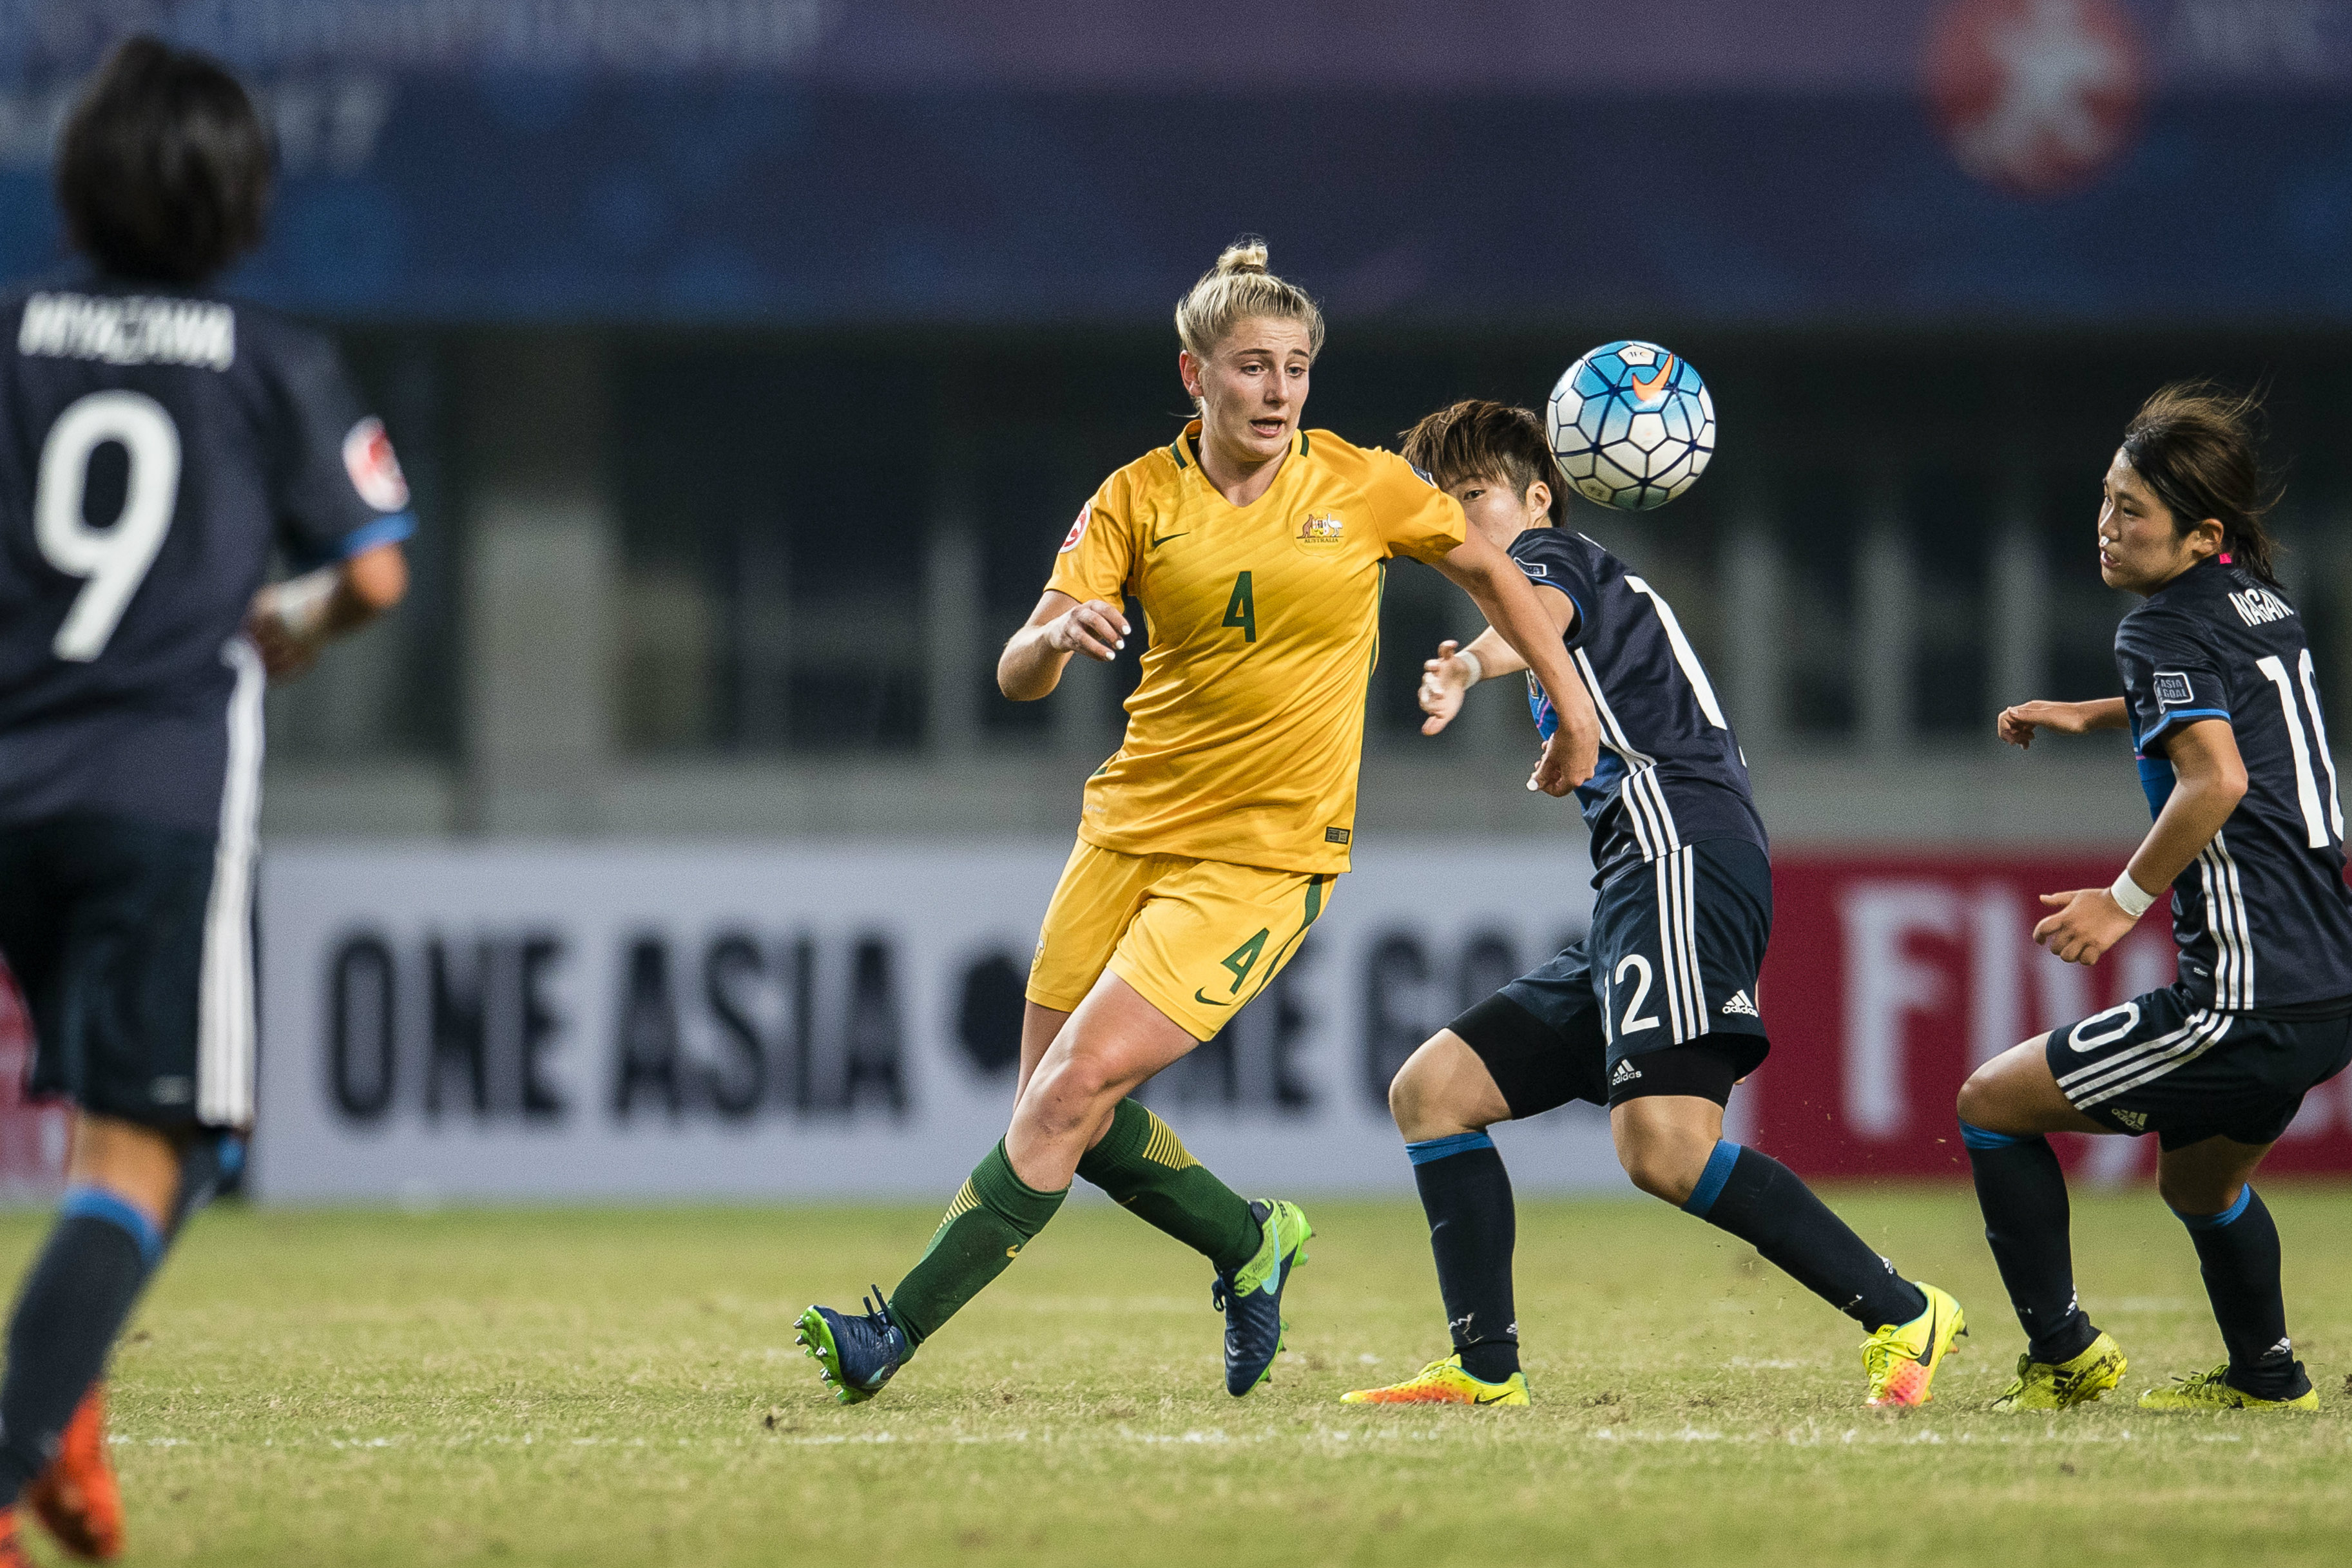 Remy Siemsen is proving to be a deadly striker for both Sydney FC and the Young Matildas.